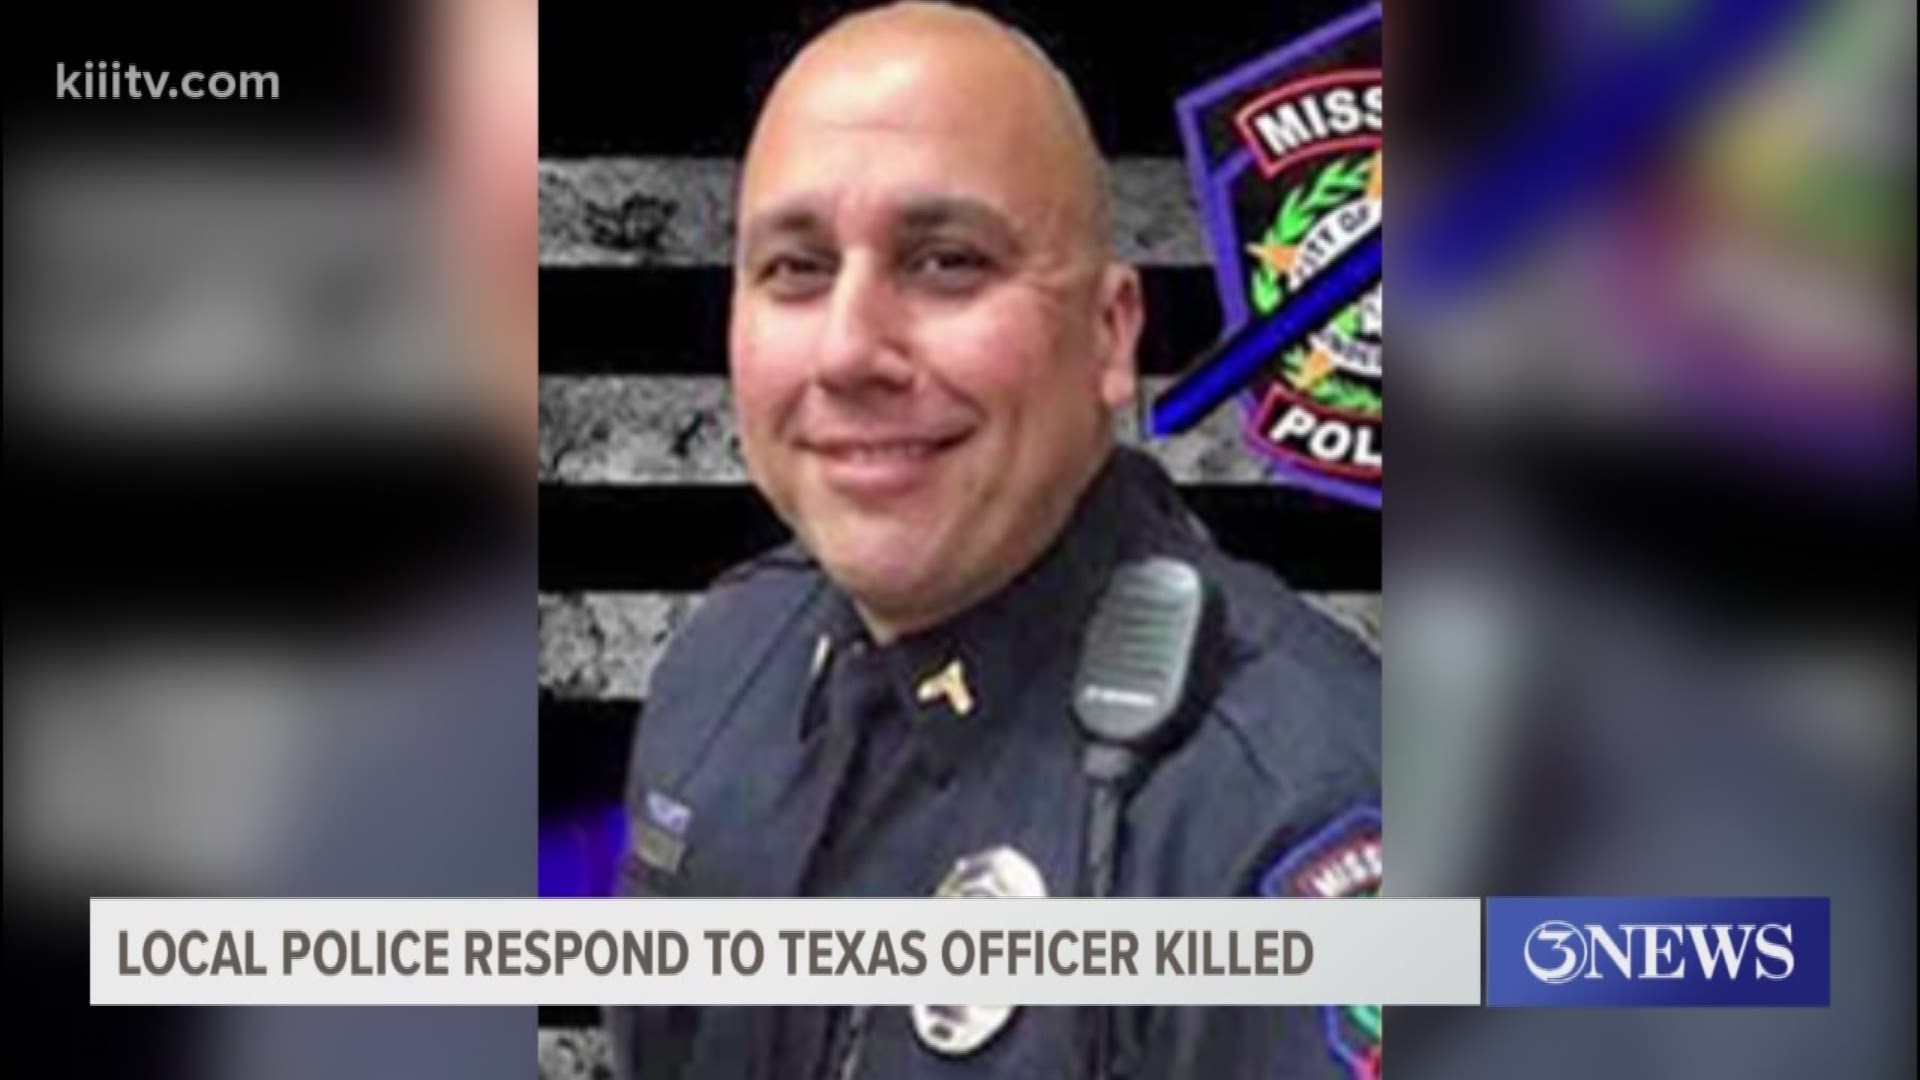 The government reports at least 57 police officers have been killed in the line of duty this year. The latest happened Thursday night in Mission, Texas.